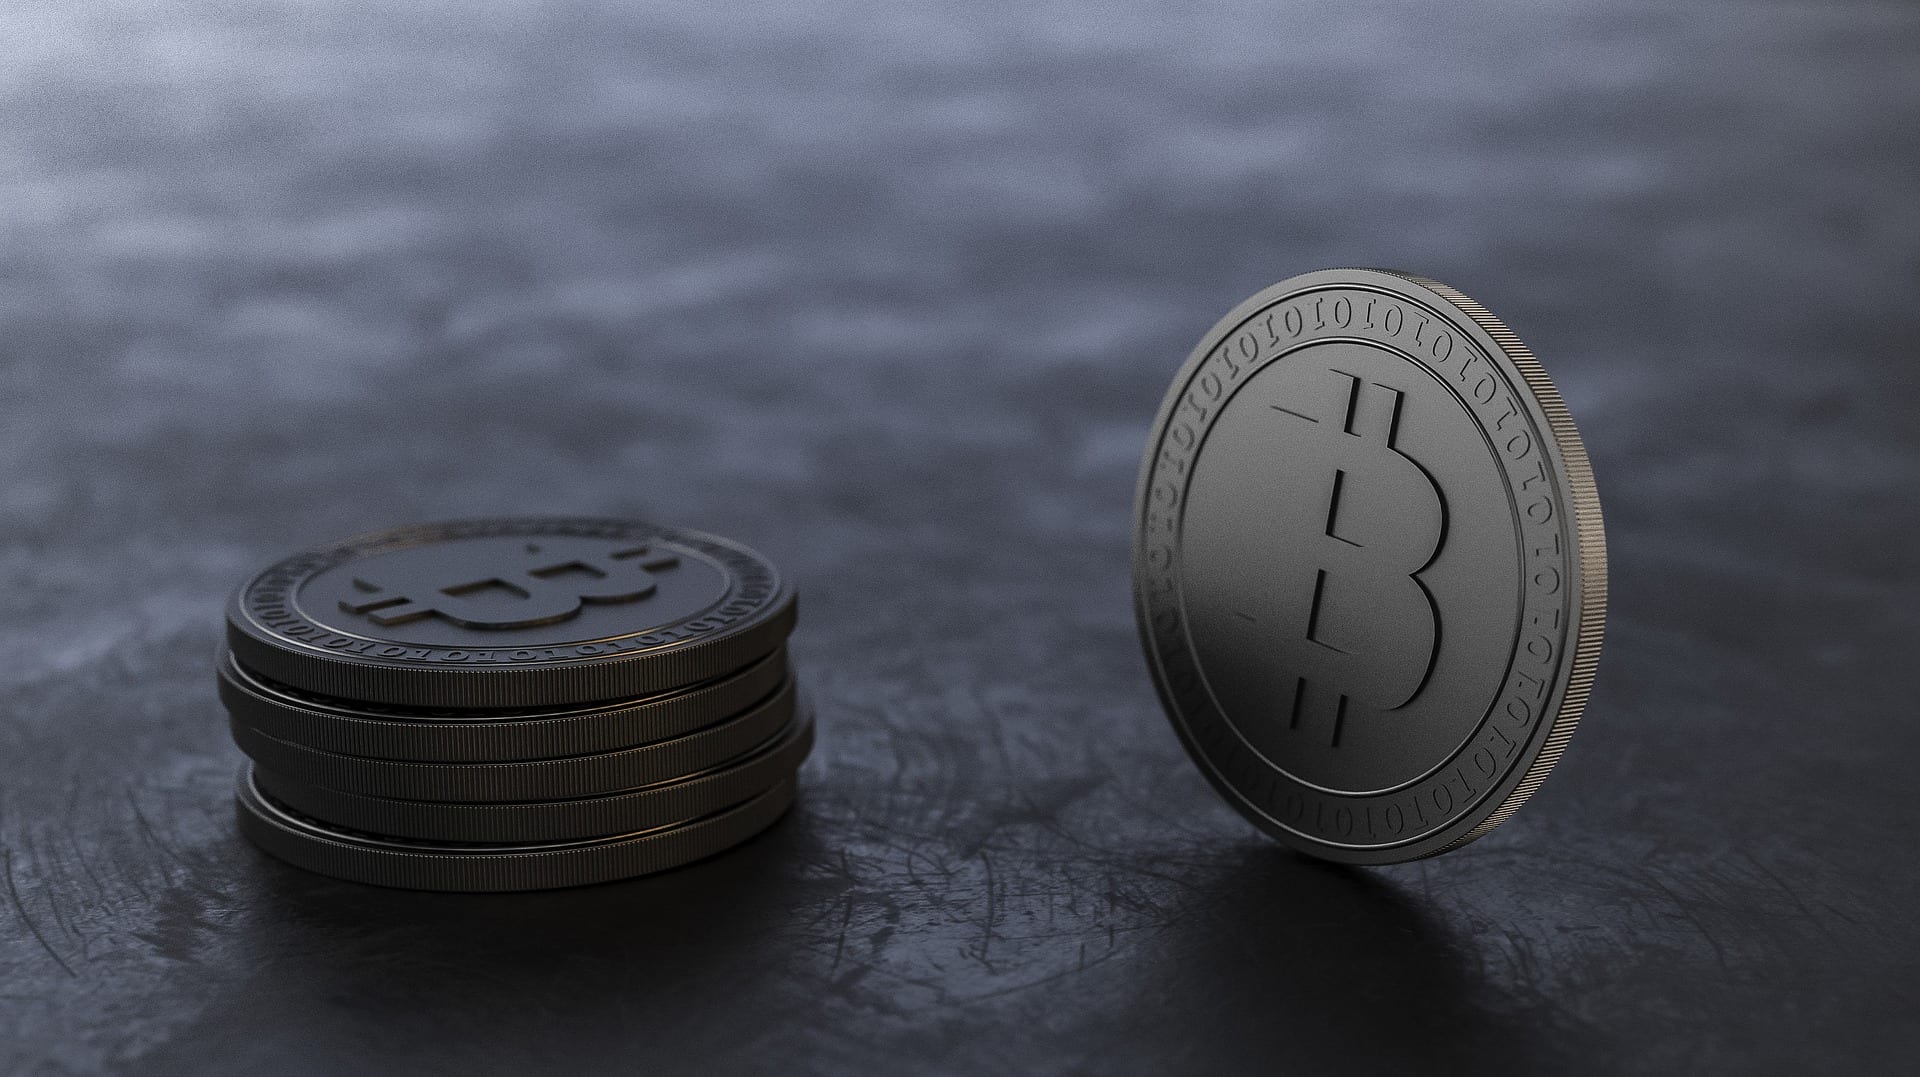 Snelle herstel Bitcoin hash rate na halving